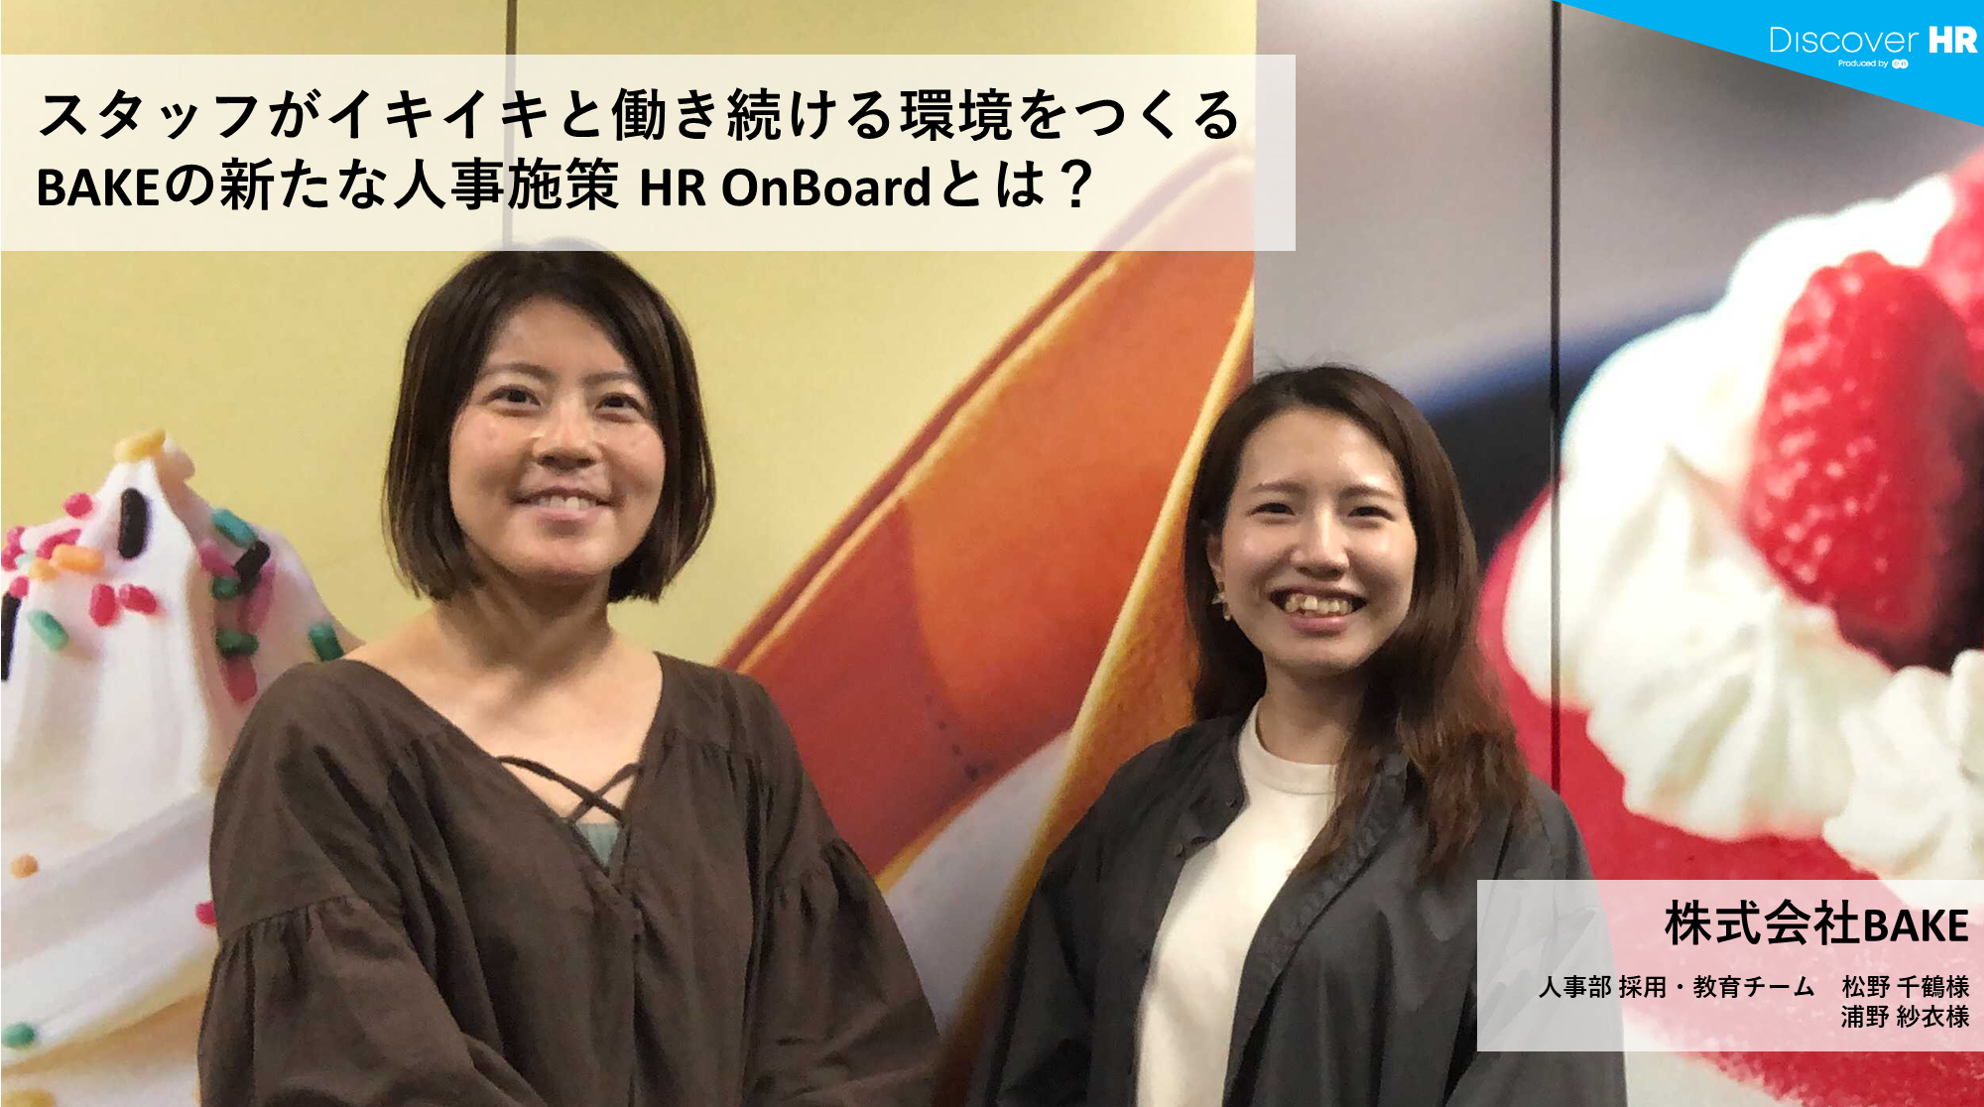 Discover HR Story | 株式会社BAKE